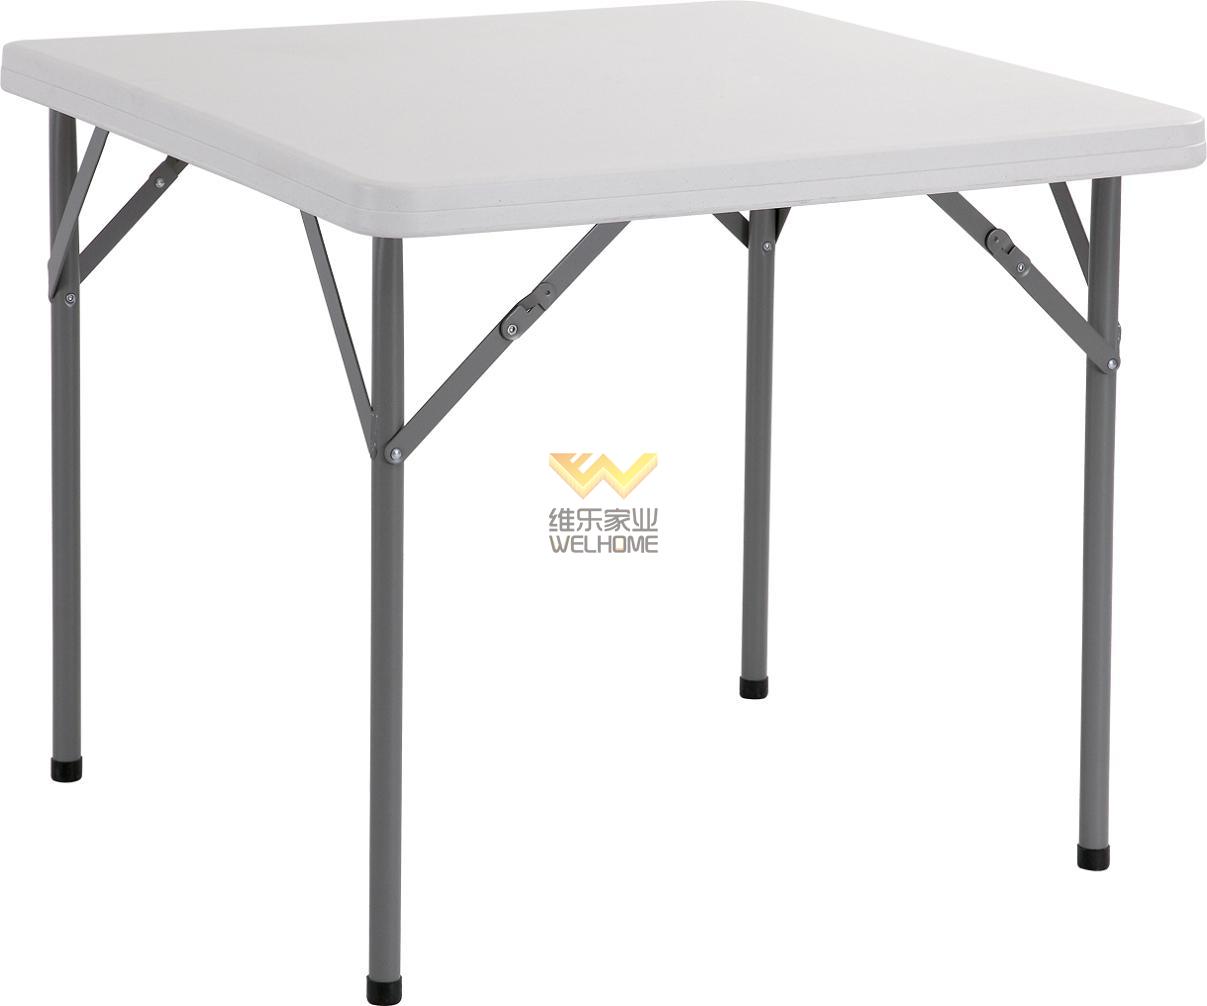 Plastic Square folding table for event/meetings